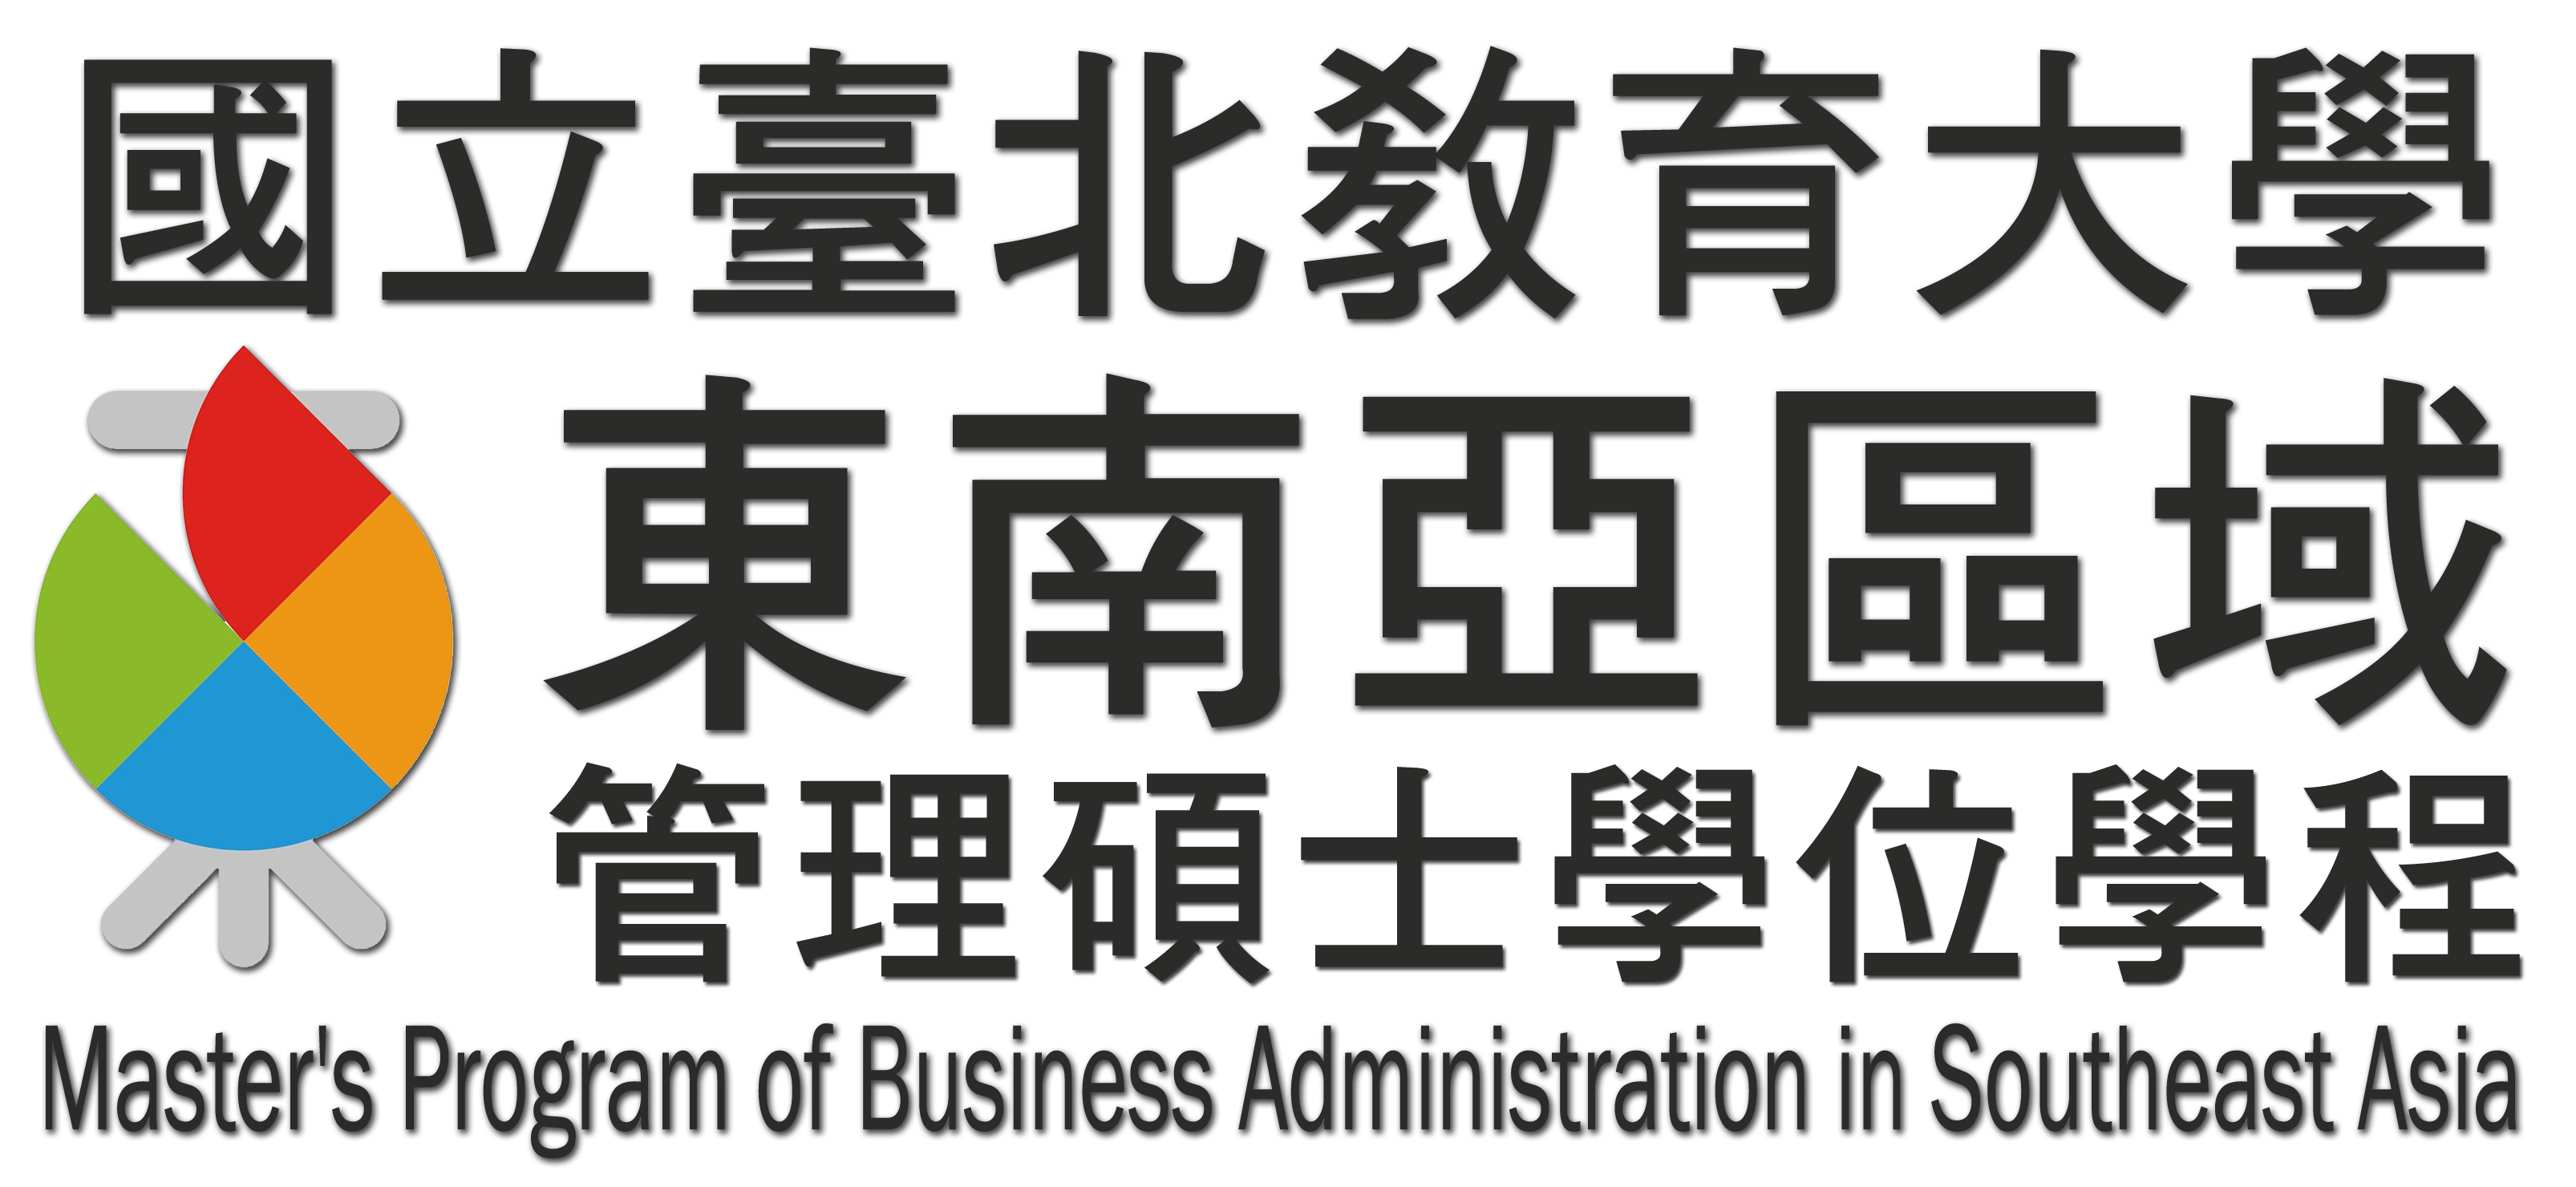 Master’s Program of Business Administration in South East Asia